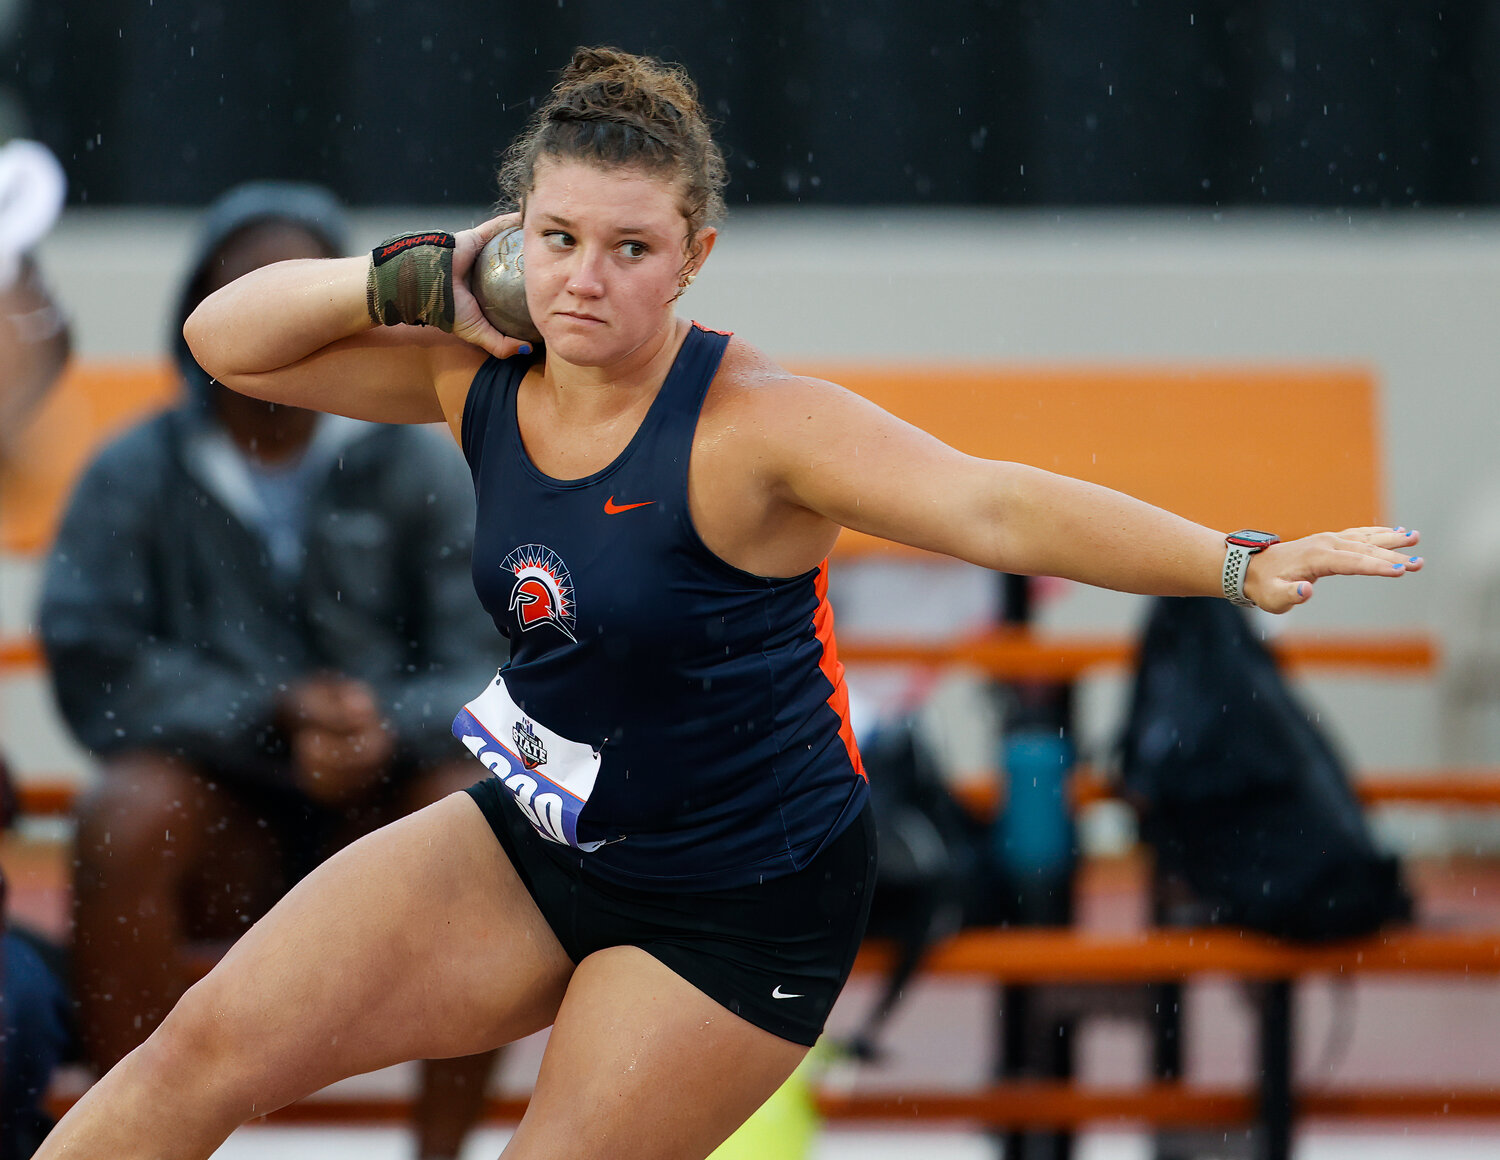 Janey Campbell of Seven Lakes High School (1630) competes in the Class 6A girls shot put event during the UIL State Track and Field Meet on Saturday, May 13, 2023 in Austin.